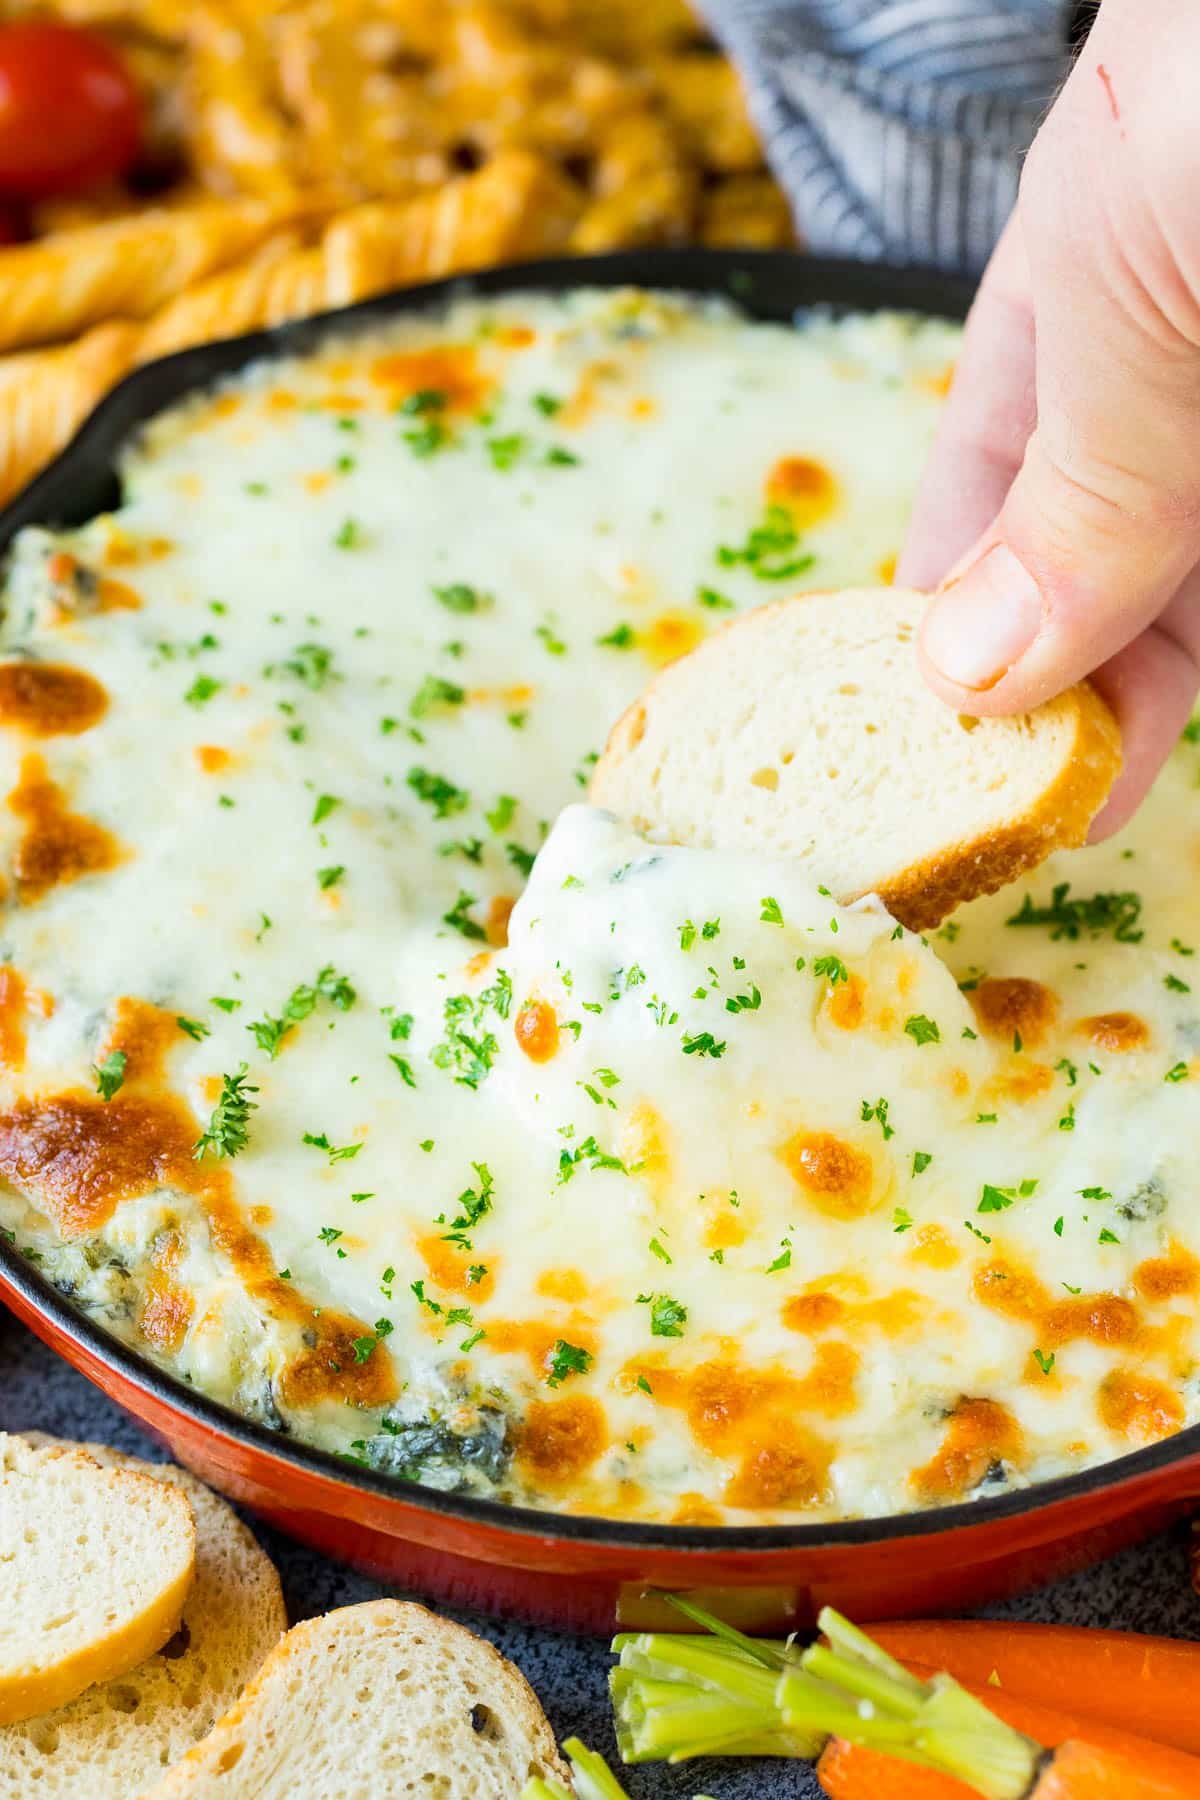 Bread in a pan of cheesy dip.